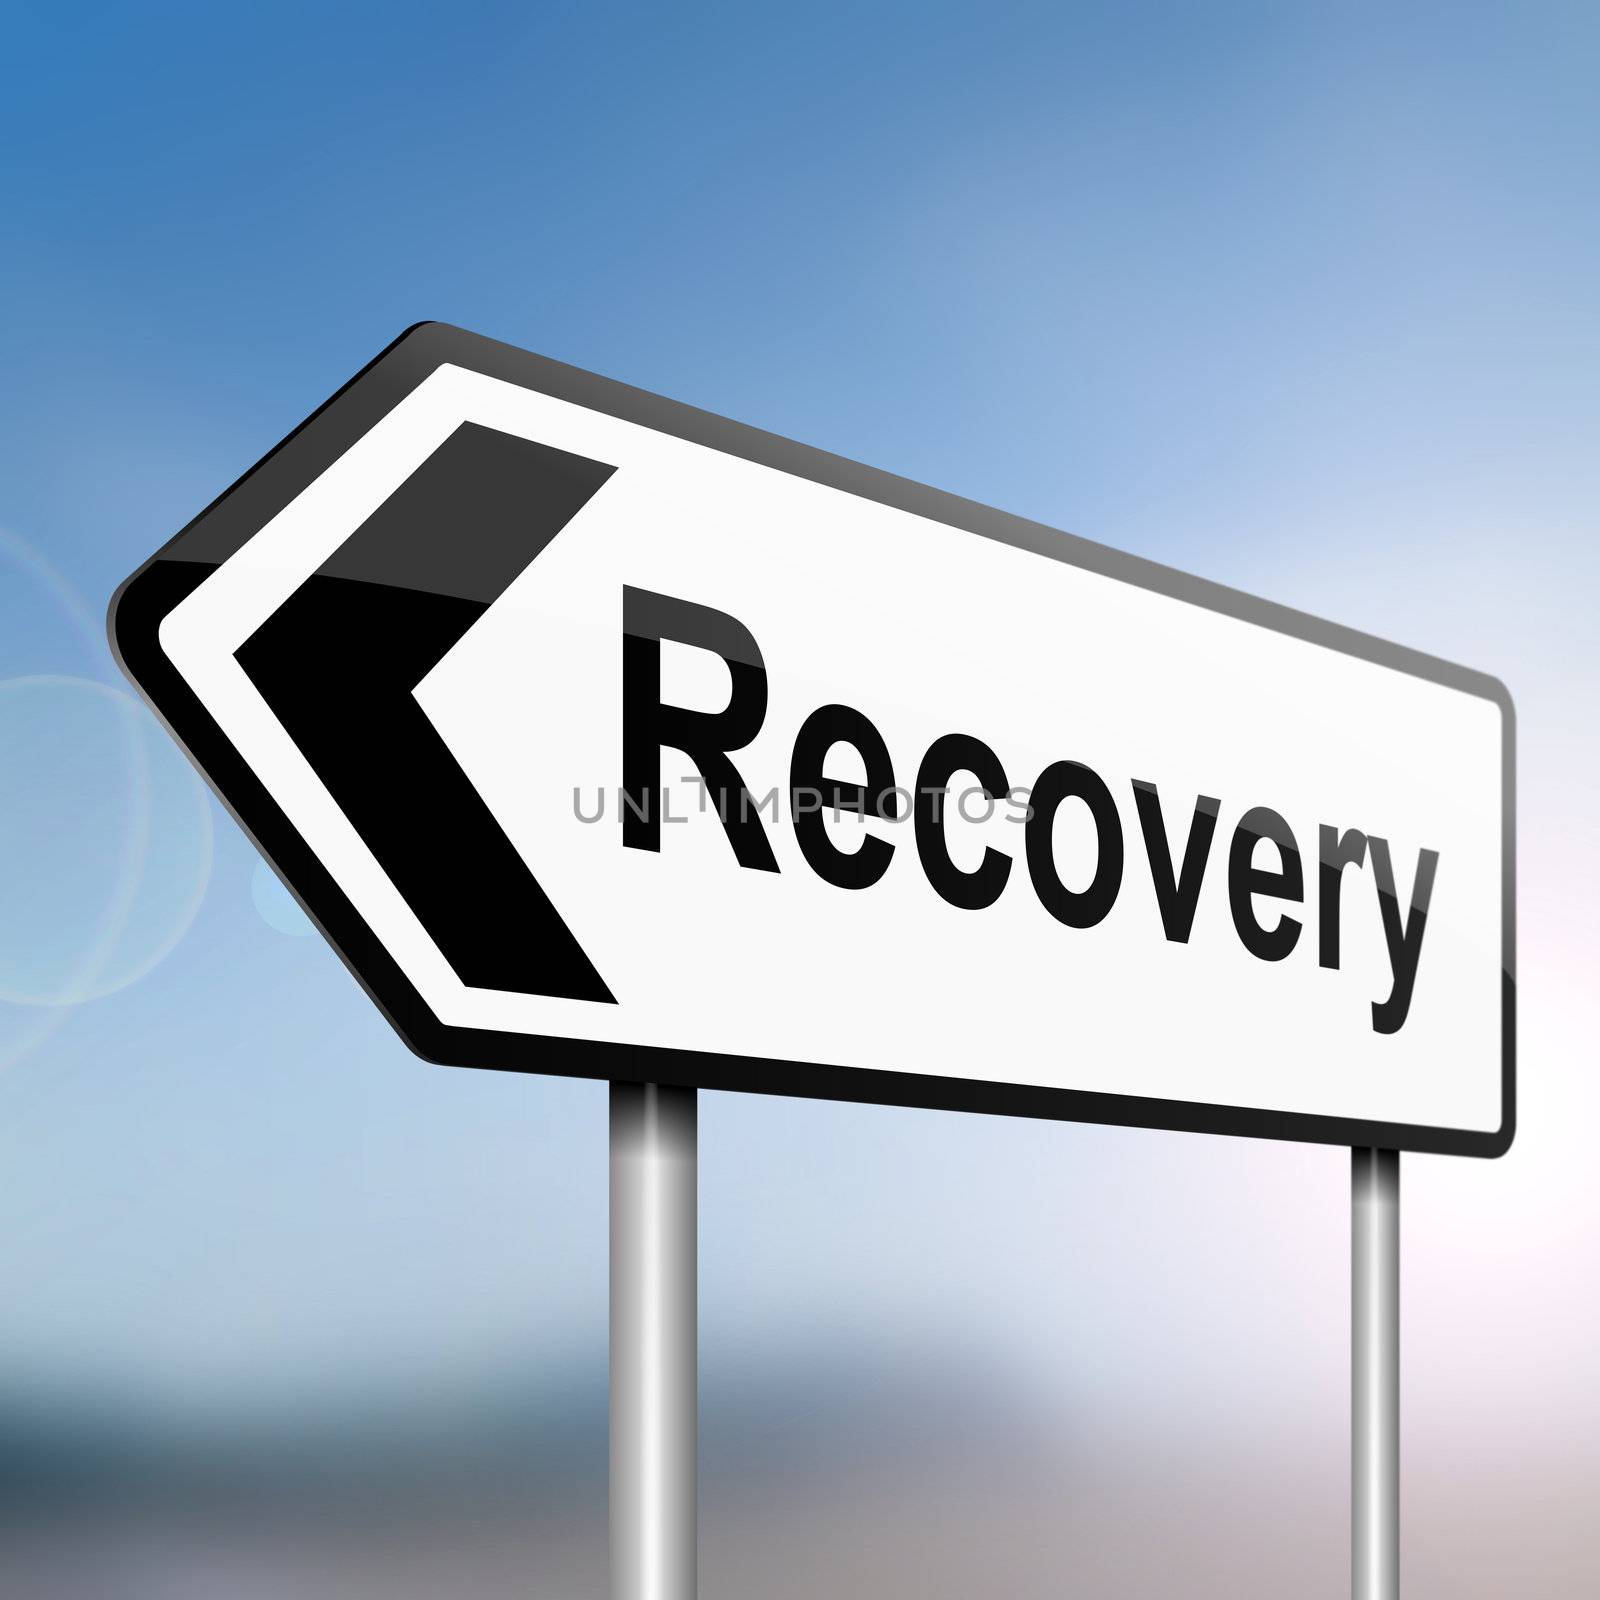 illustration depicting a sign post with directional arrow containing a recovery concept. Blurred background.